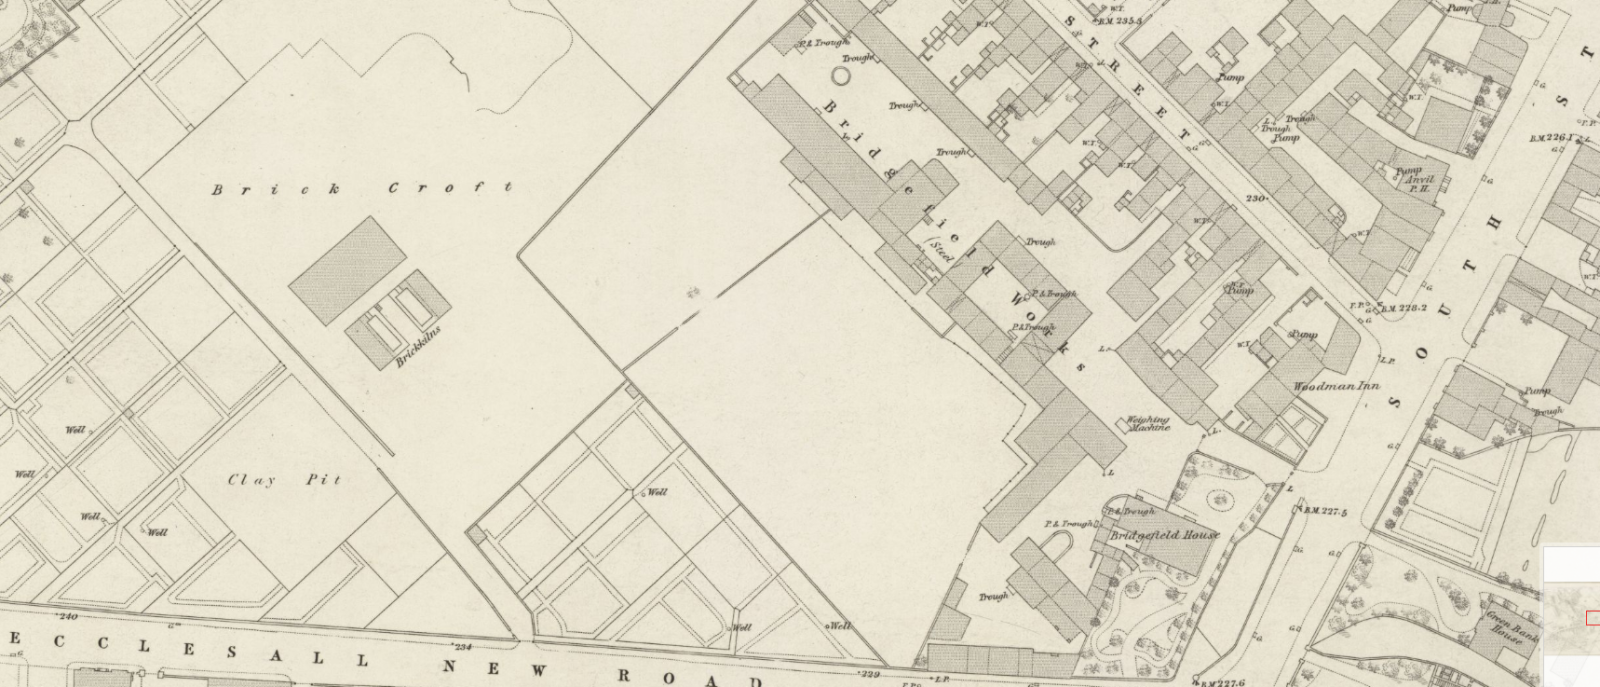 Screenshot 2024-02-12 at 08-56-50 View map Great Britain. Ordnance Survey OS town plan - Sheffield - sheet 30 - Ordnance Survey Town Plans of England and Wales 1840s-1890s.png